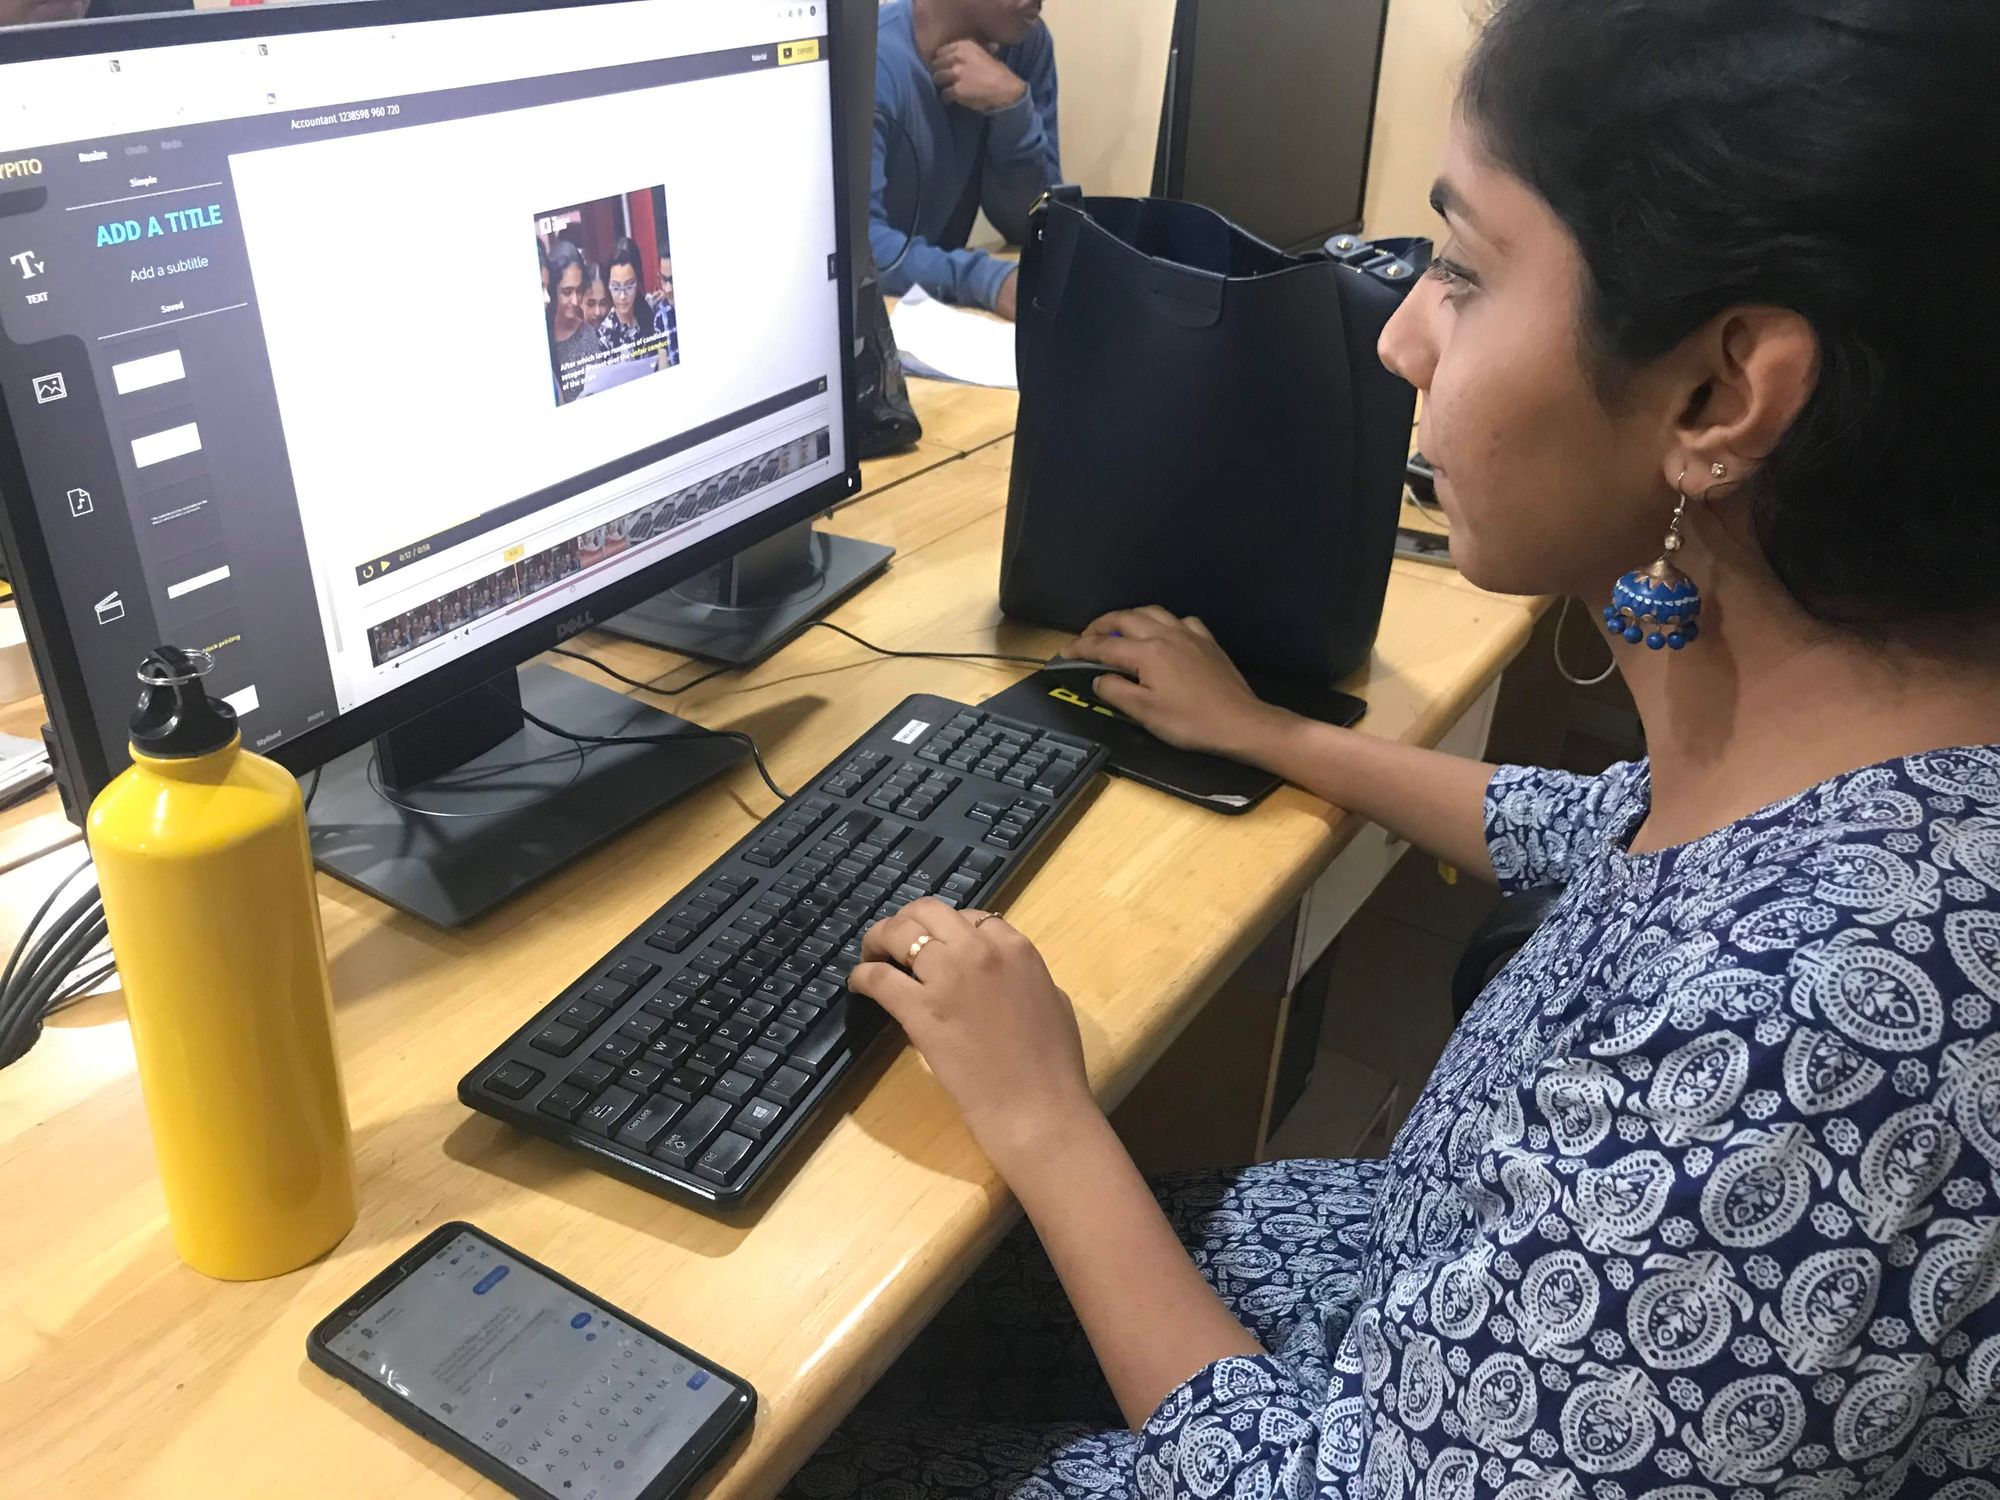 Navya, one of the full stack journalists in The Logical Indian's newsroom, designing a video story on Typito